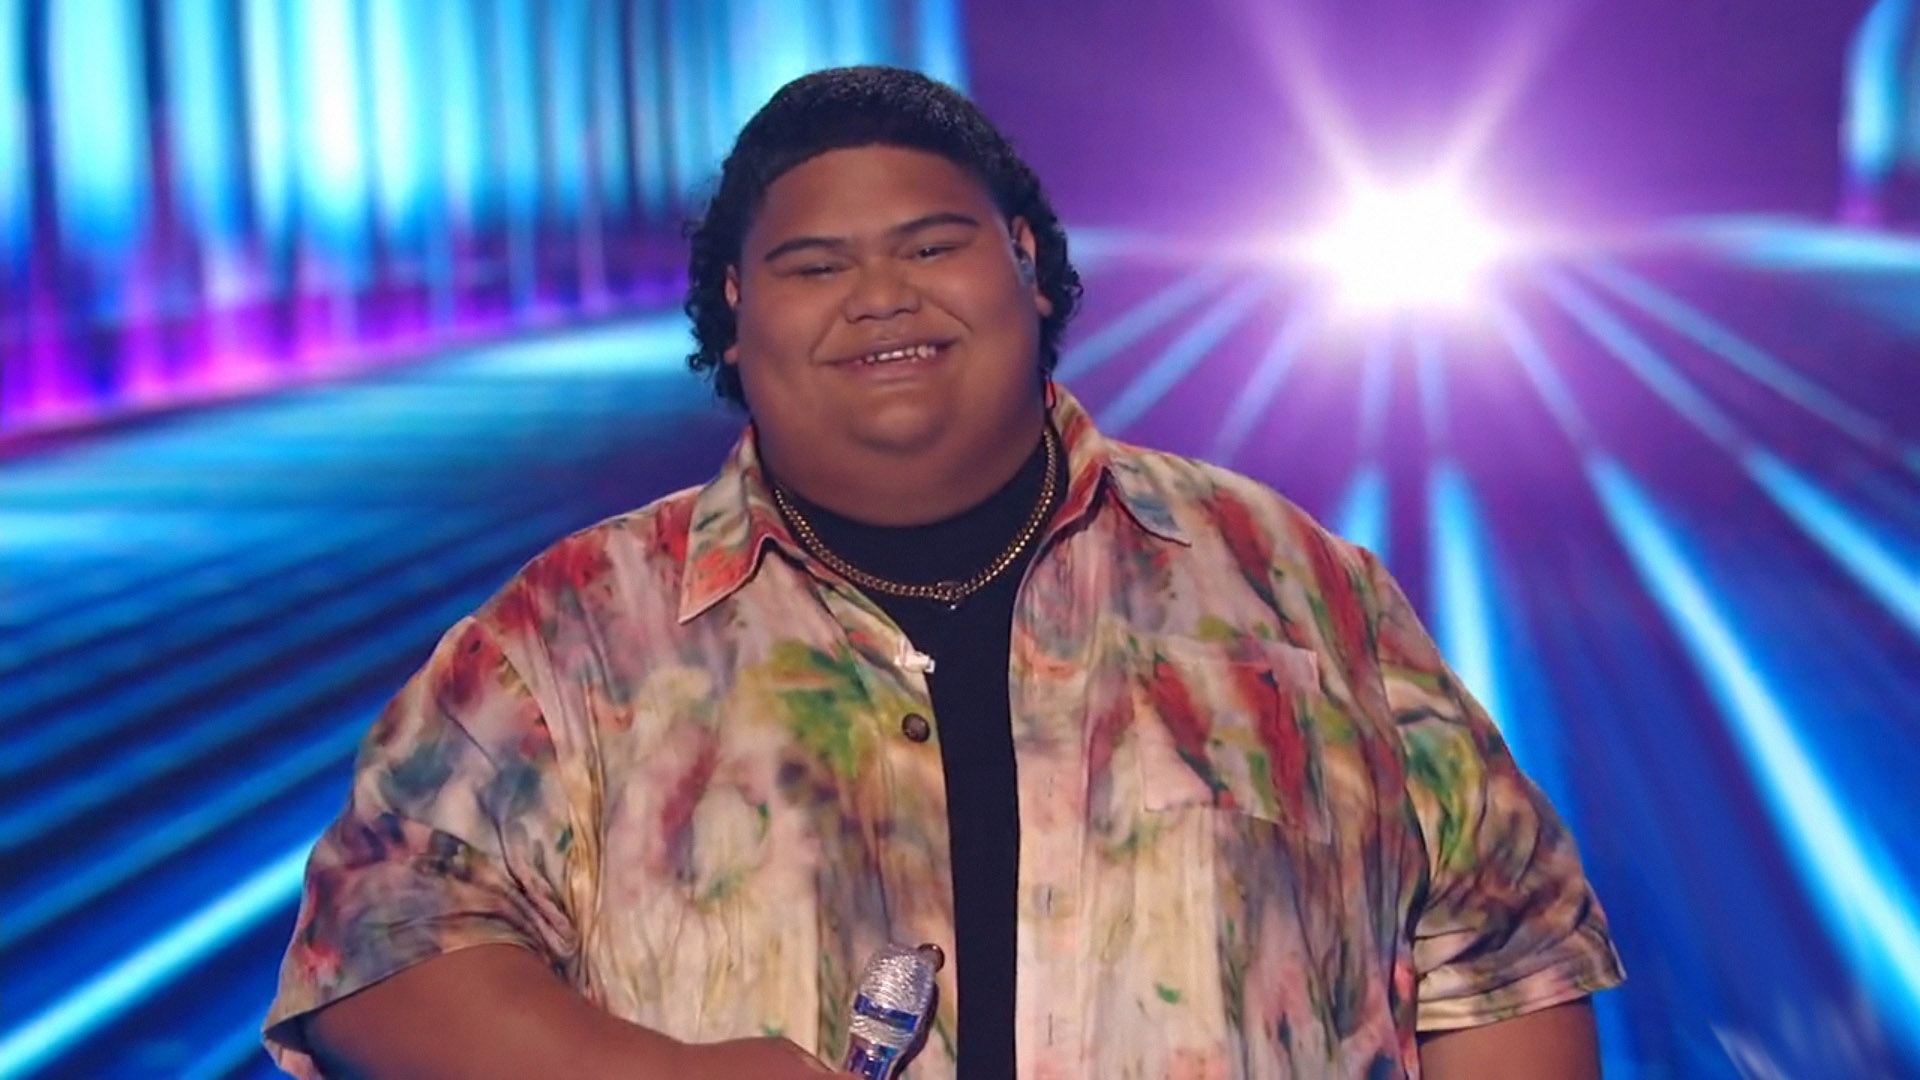 Does Iam Tongi Have What It Takes to Be a Star? American Idol Fans Not So Sure